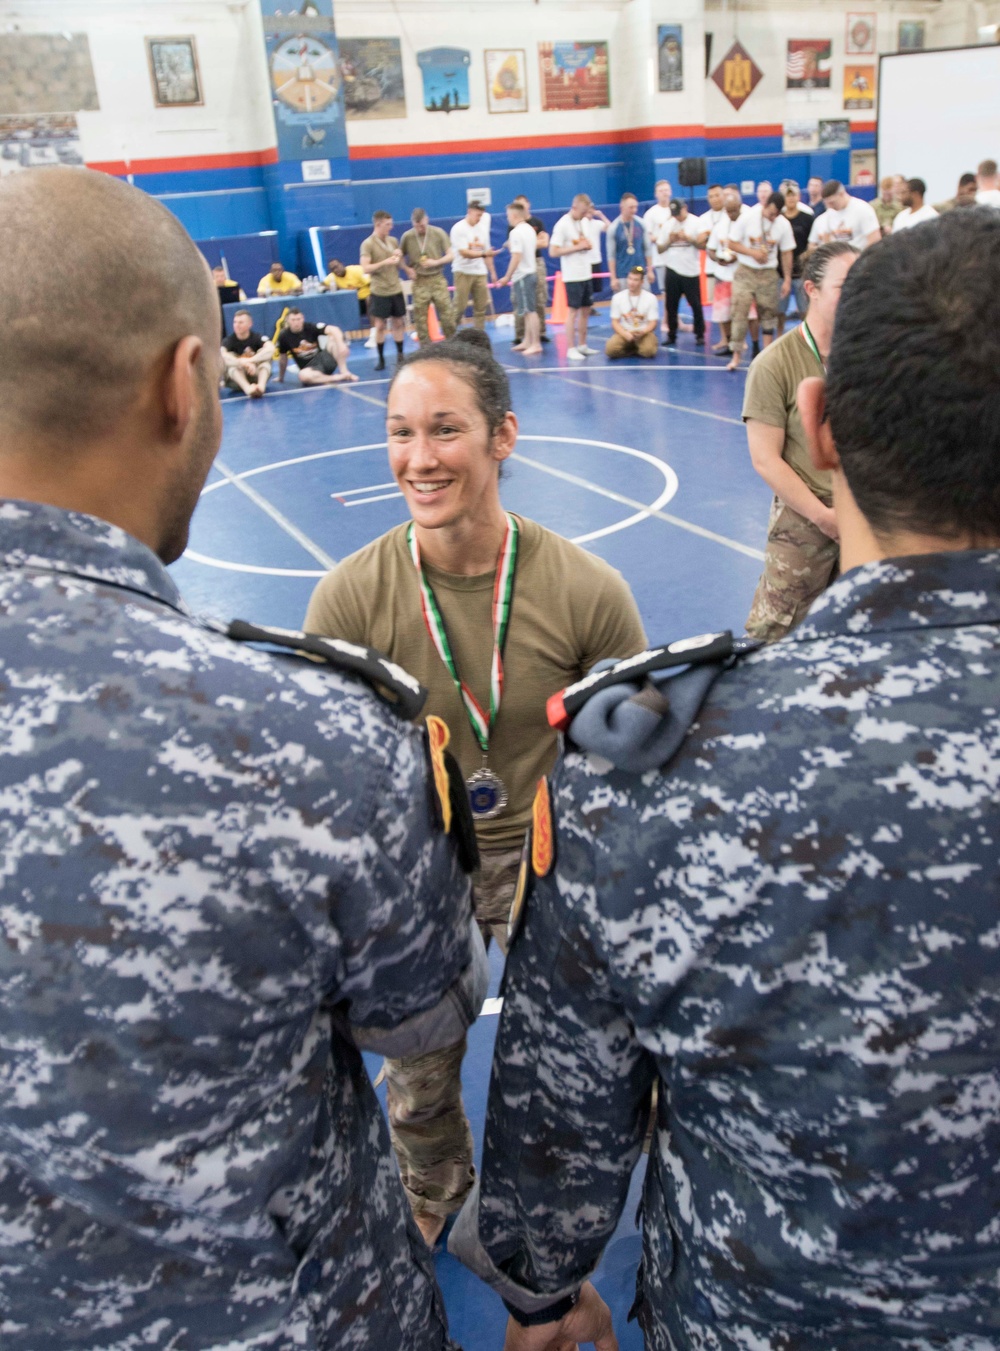 U.S. Service Members Compete with Kuwaitis in Combatives Tournament